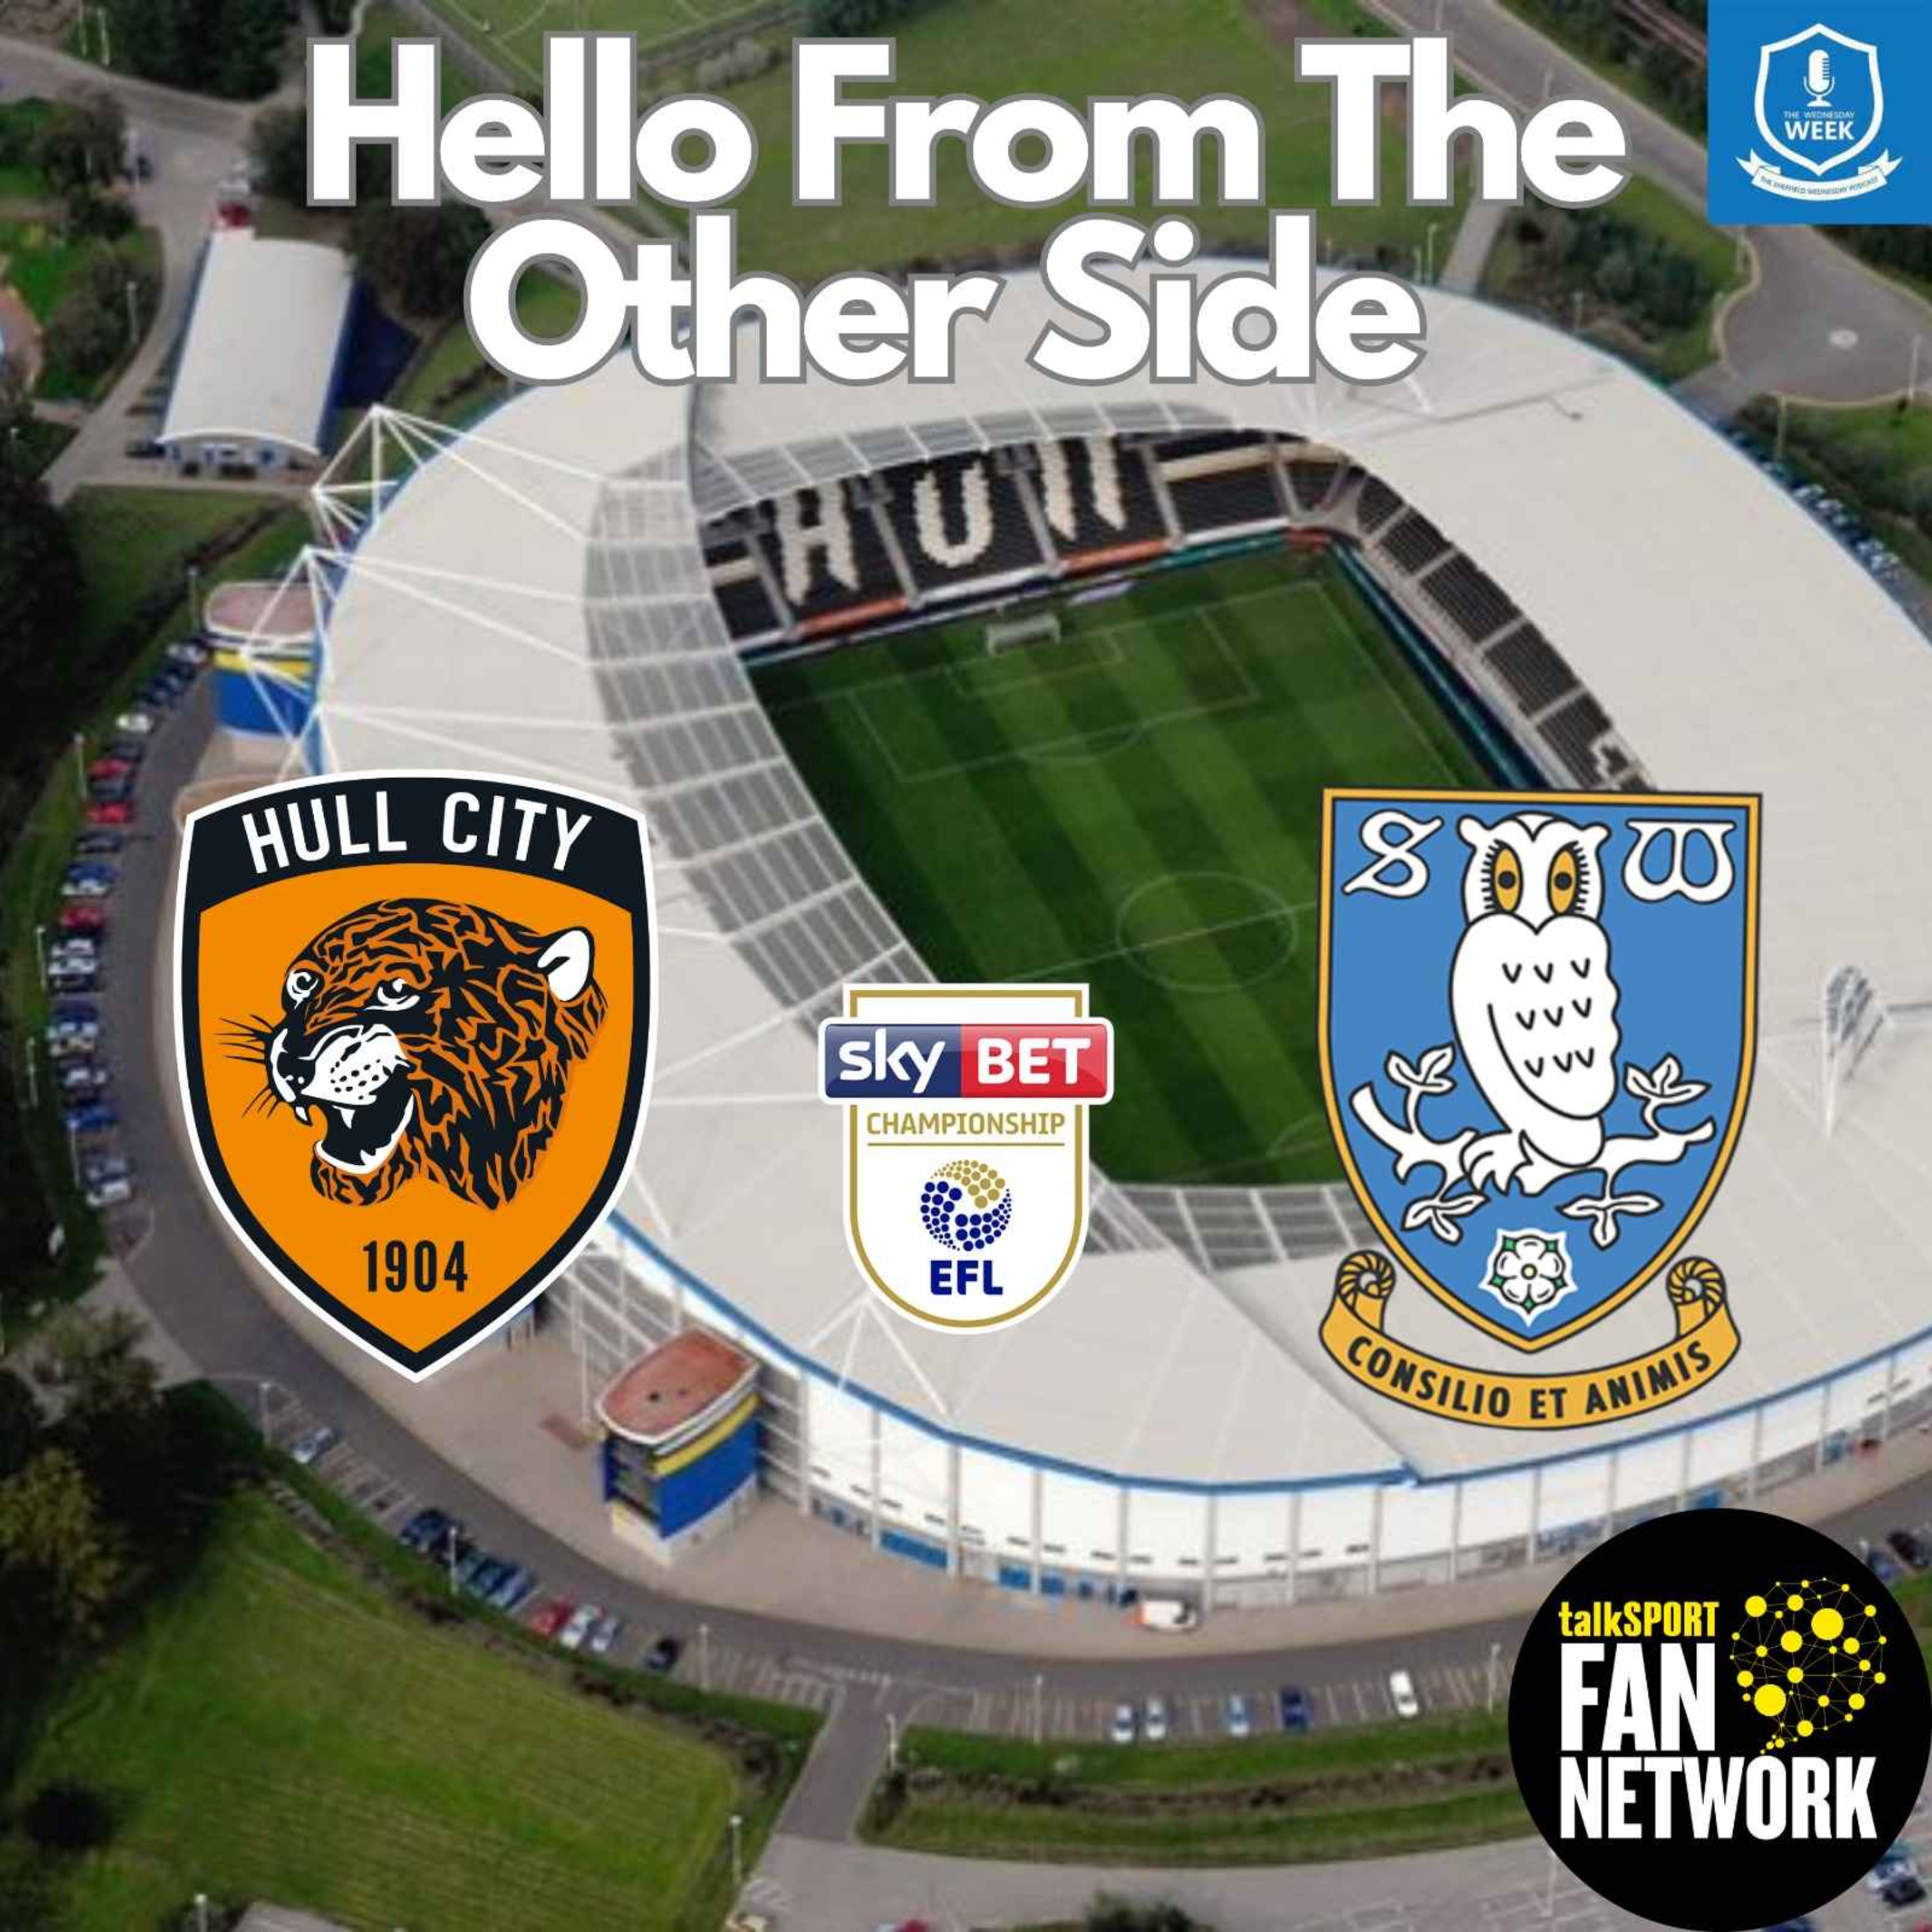 Hello From the Other Side - Hull City